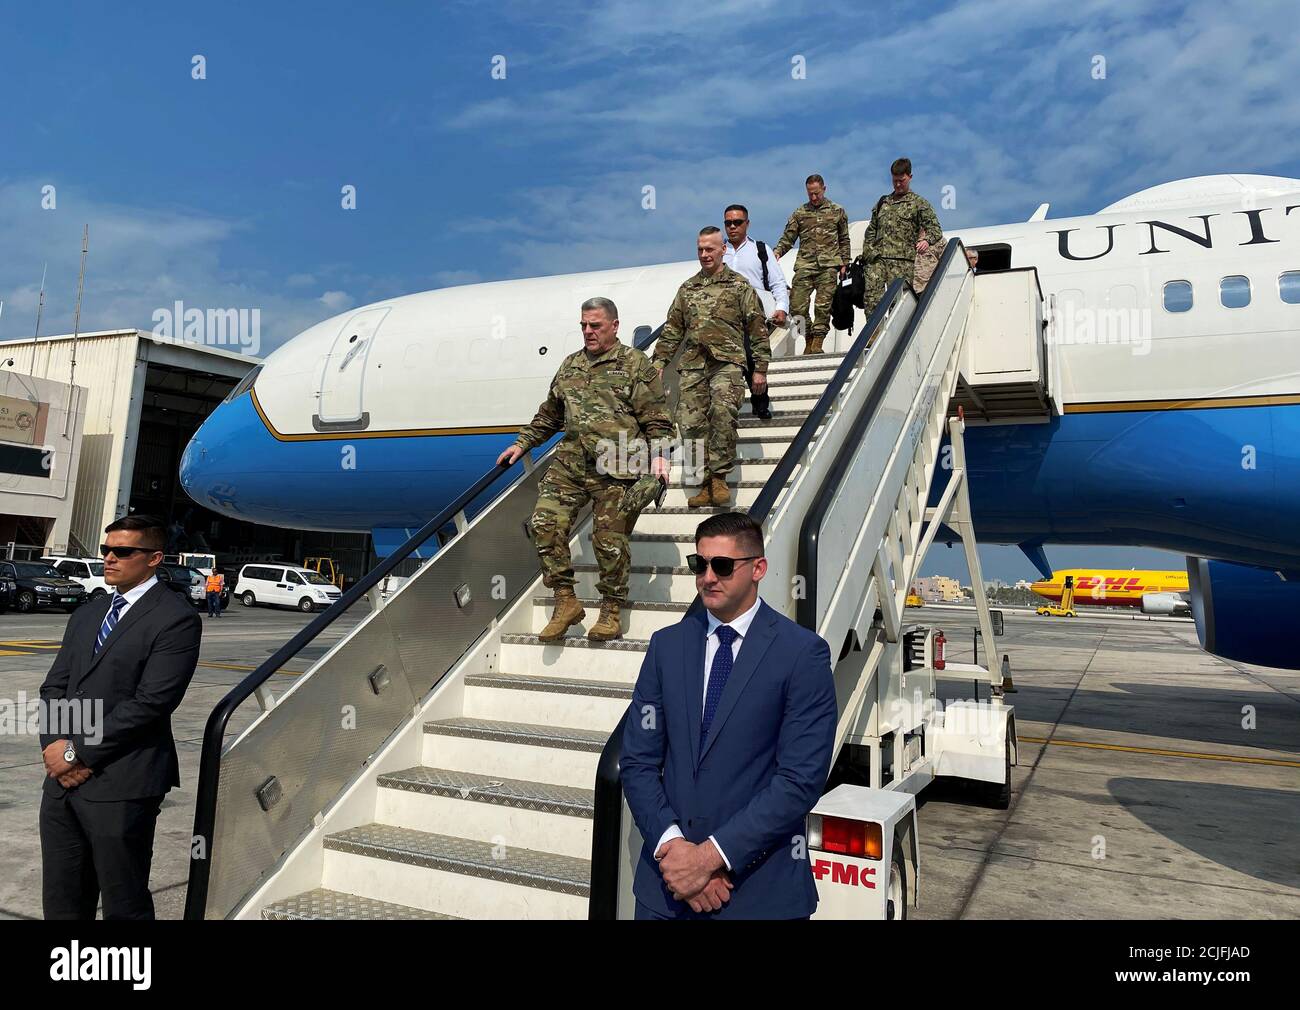 Chairman of the Joint Chiefs of Staff General Mark Milley arrives in Manama, Bahrain on November 25, 2019. REUTERS/Idrees Ali Stock Photo